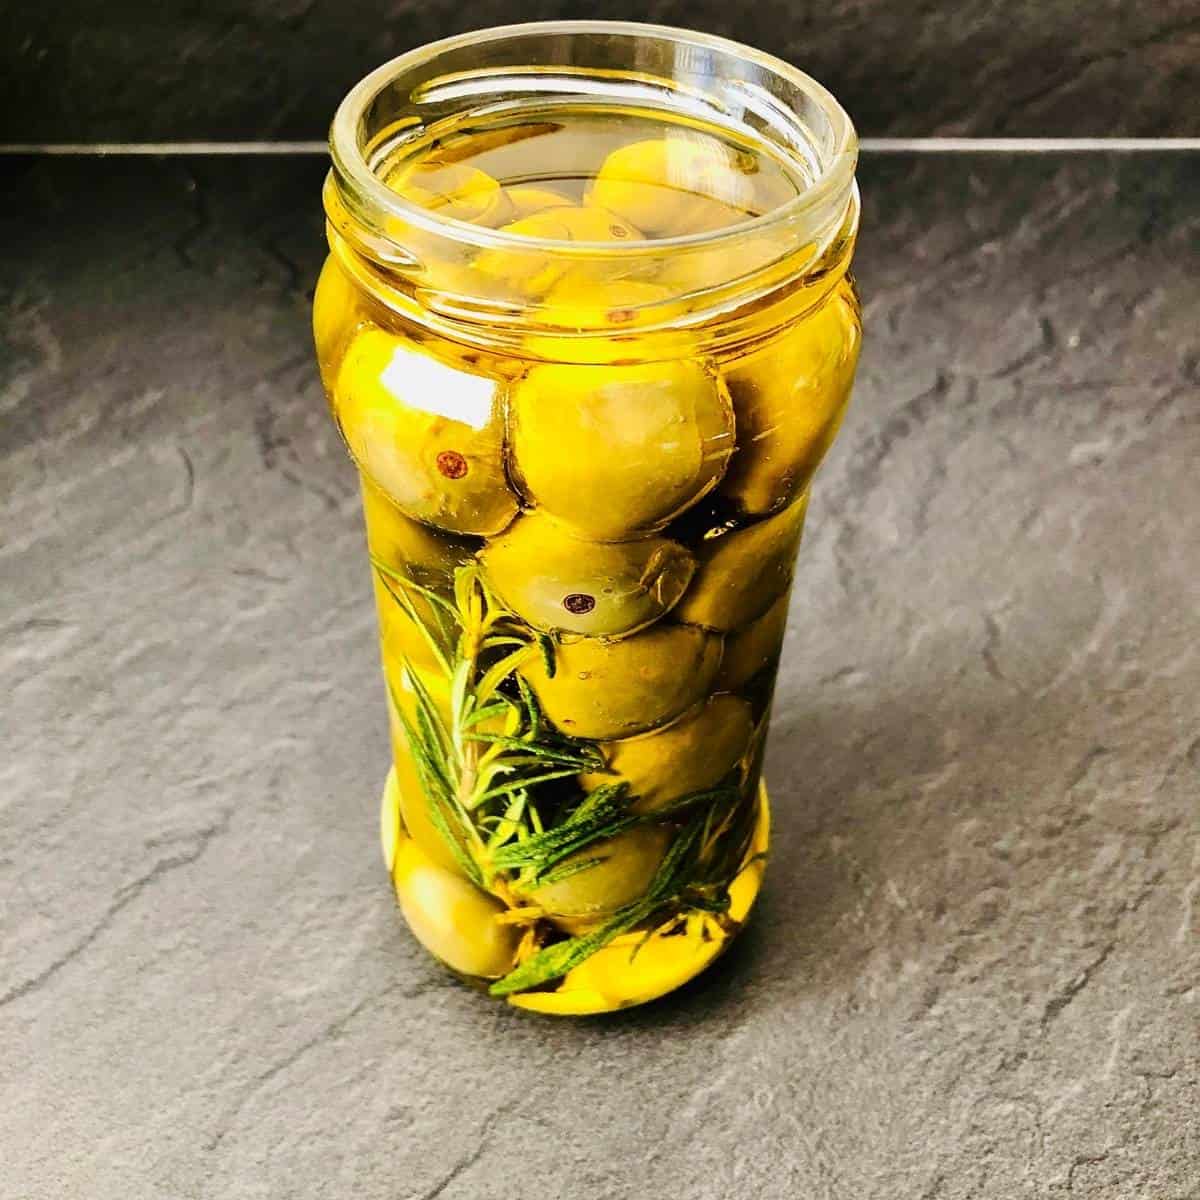 A jar of pickled plums with garlic and rosemary and olive oil.